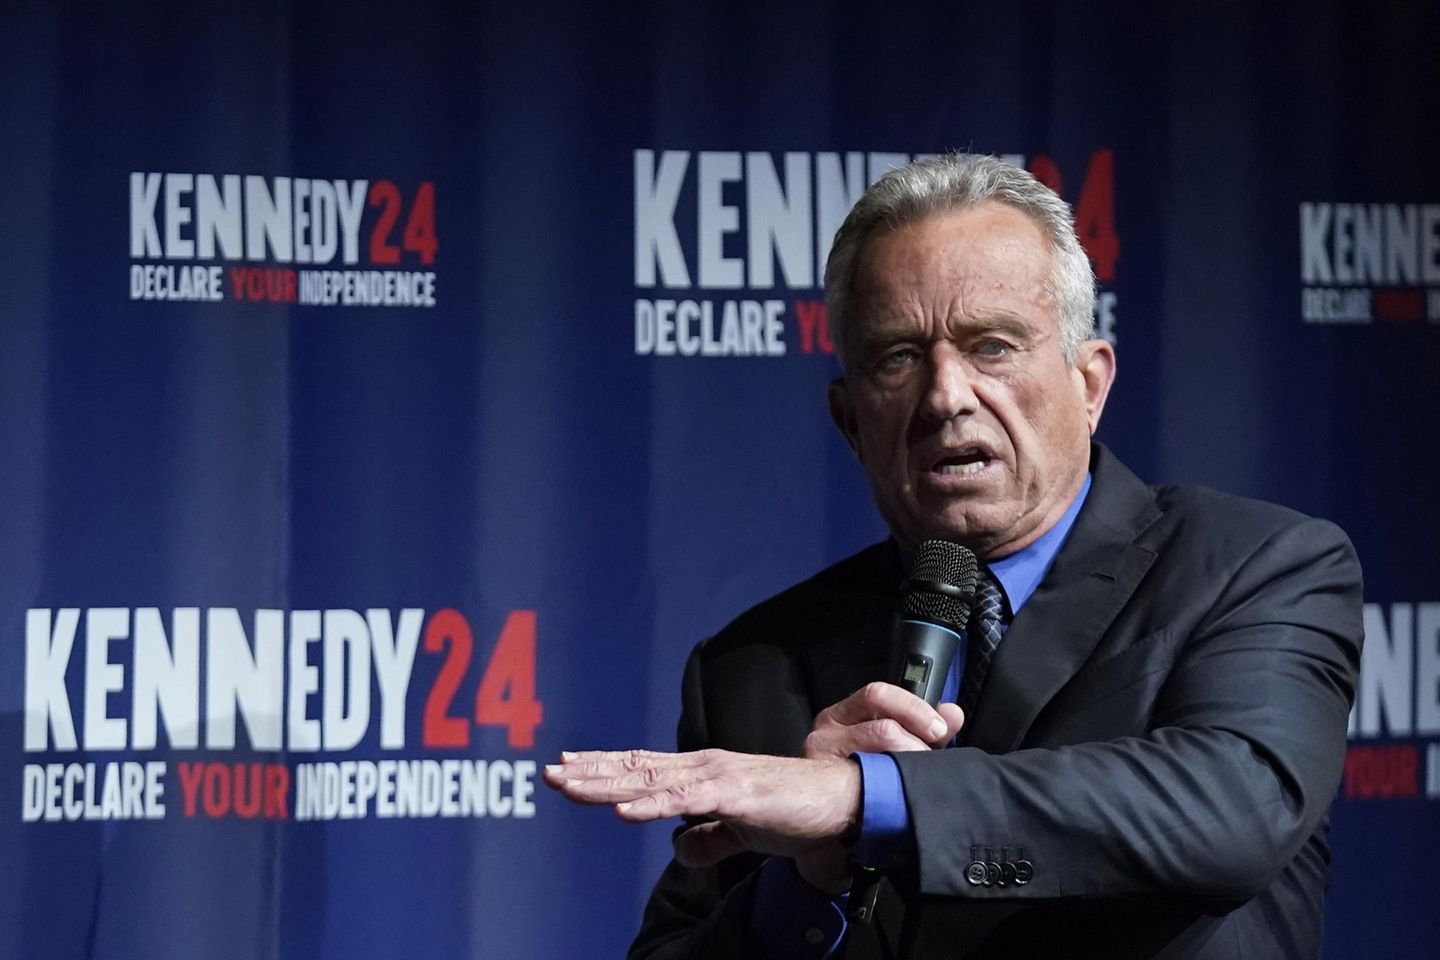 RFK Jr. to reveal running mate March 26 in unusually early announcement
